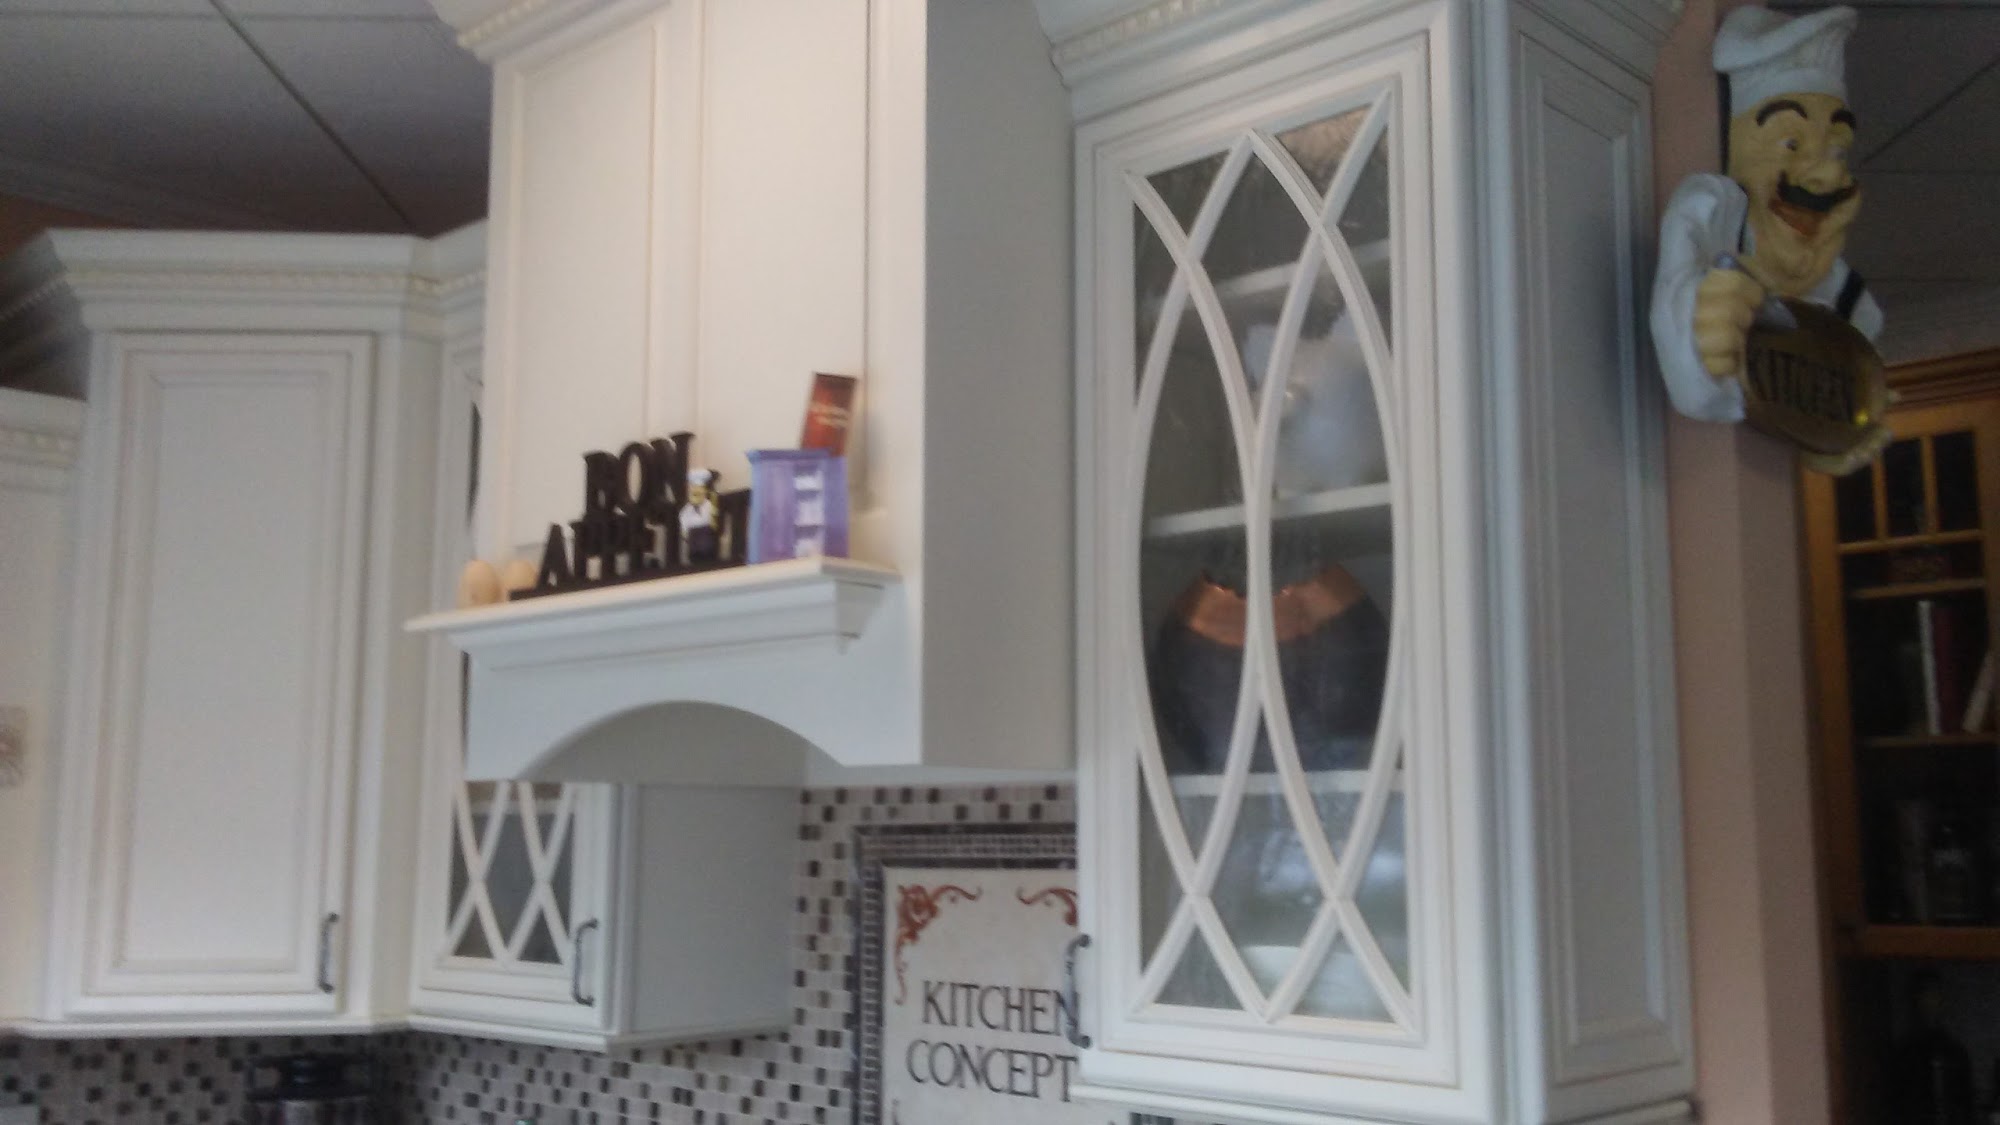 Kitchen Concepts 422 Livingston St, Norwood New Jersey 07648